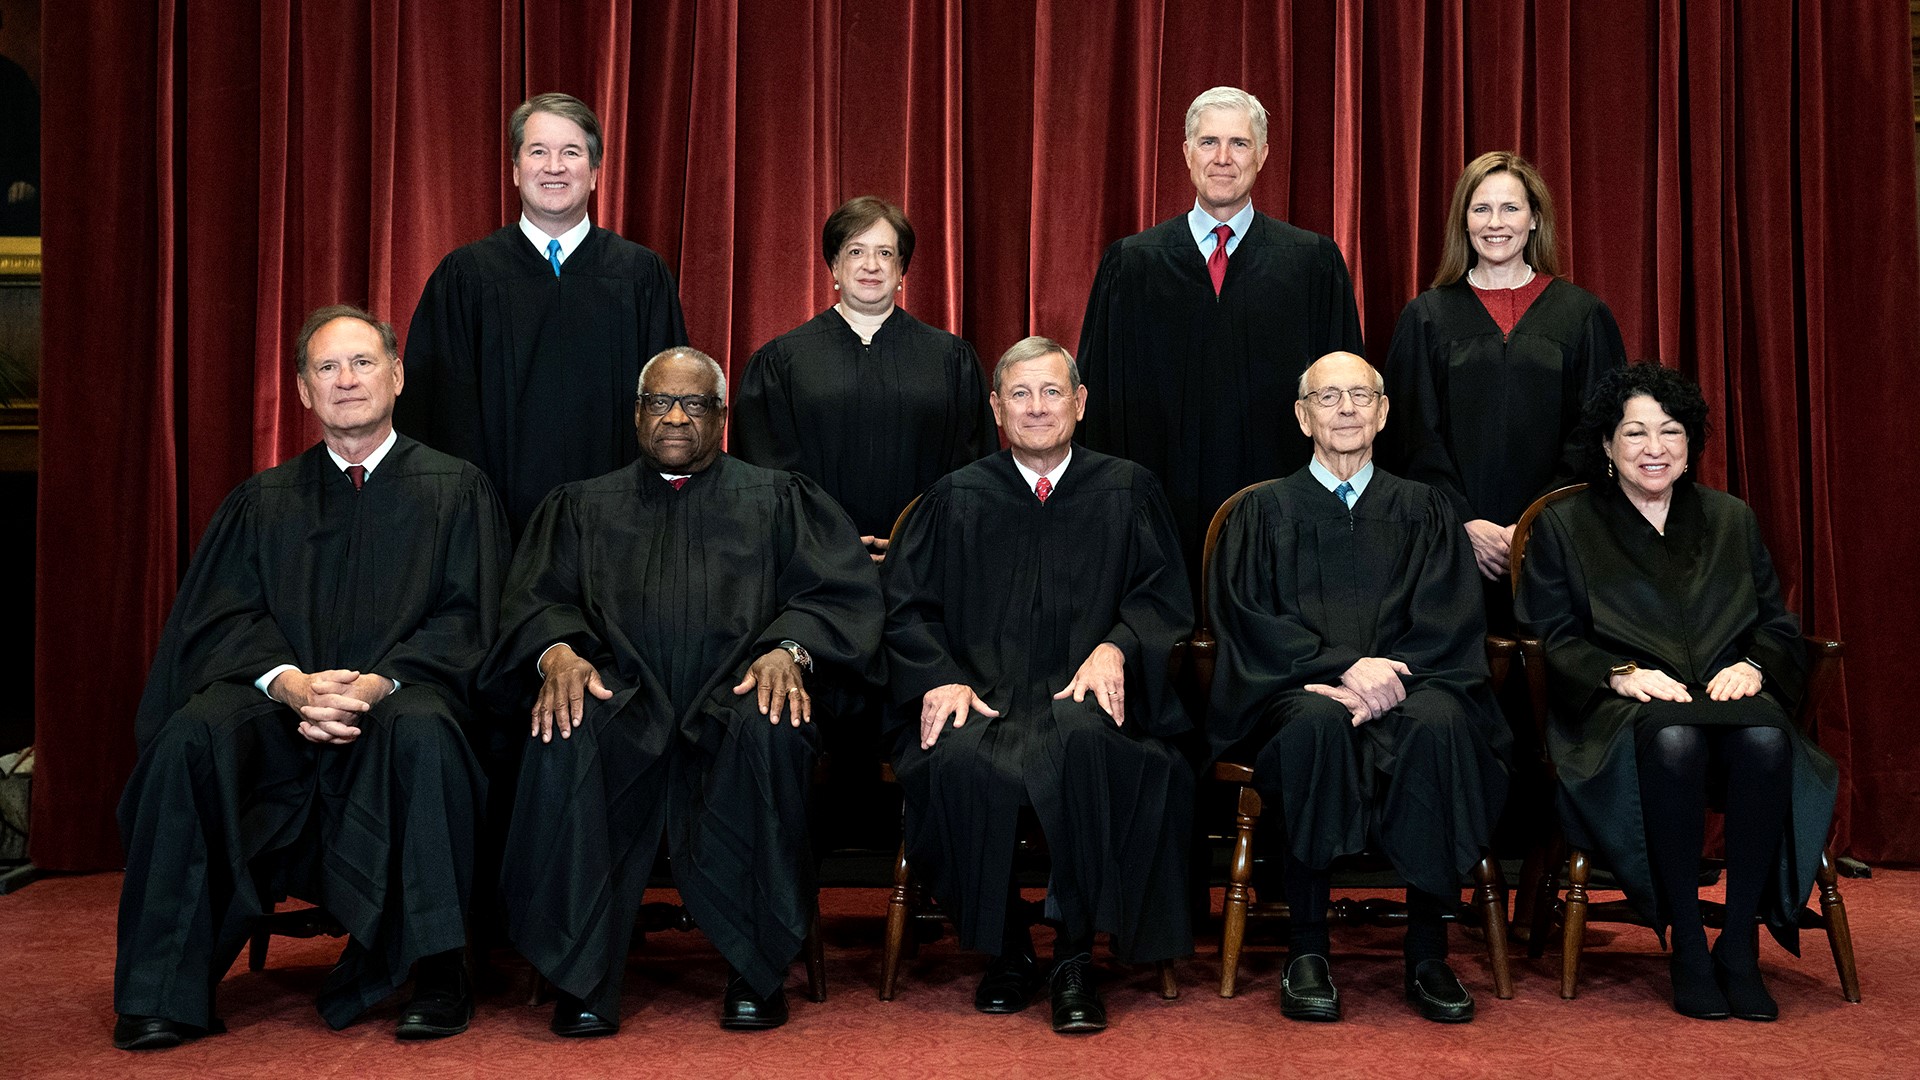 These are the nine justices on the U.S. Supreme Court, the highest court in the nation, as of April 23, 2021.